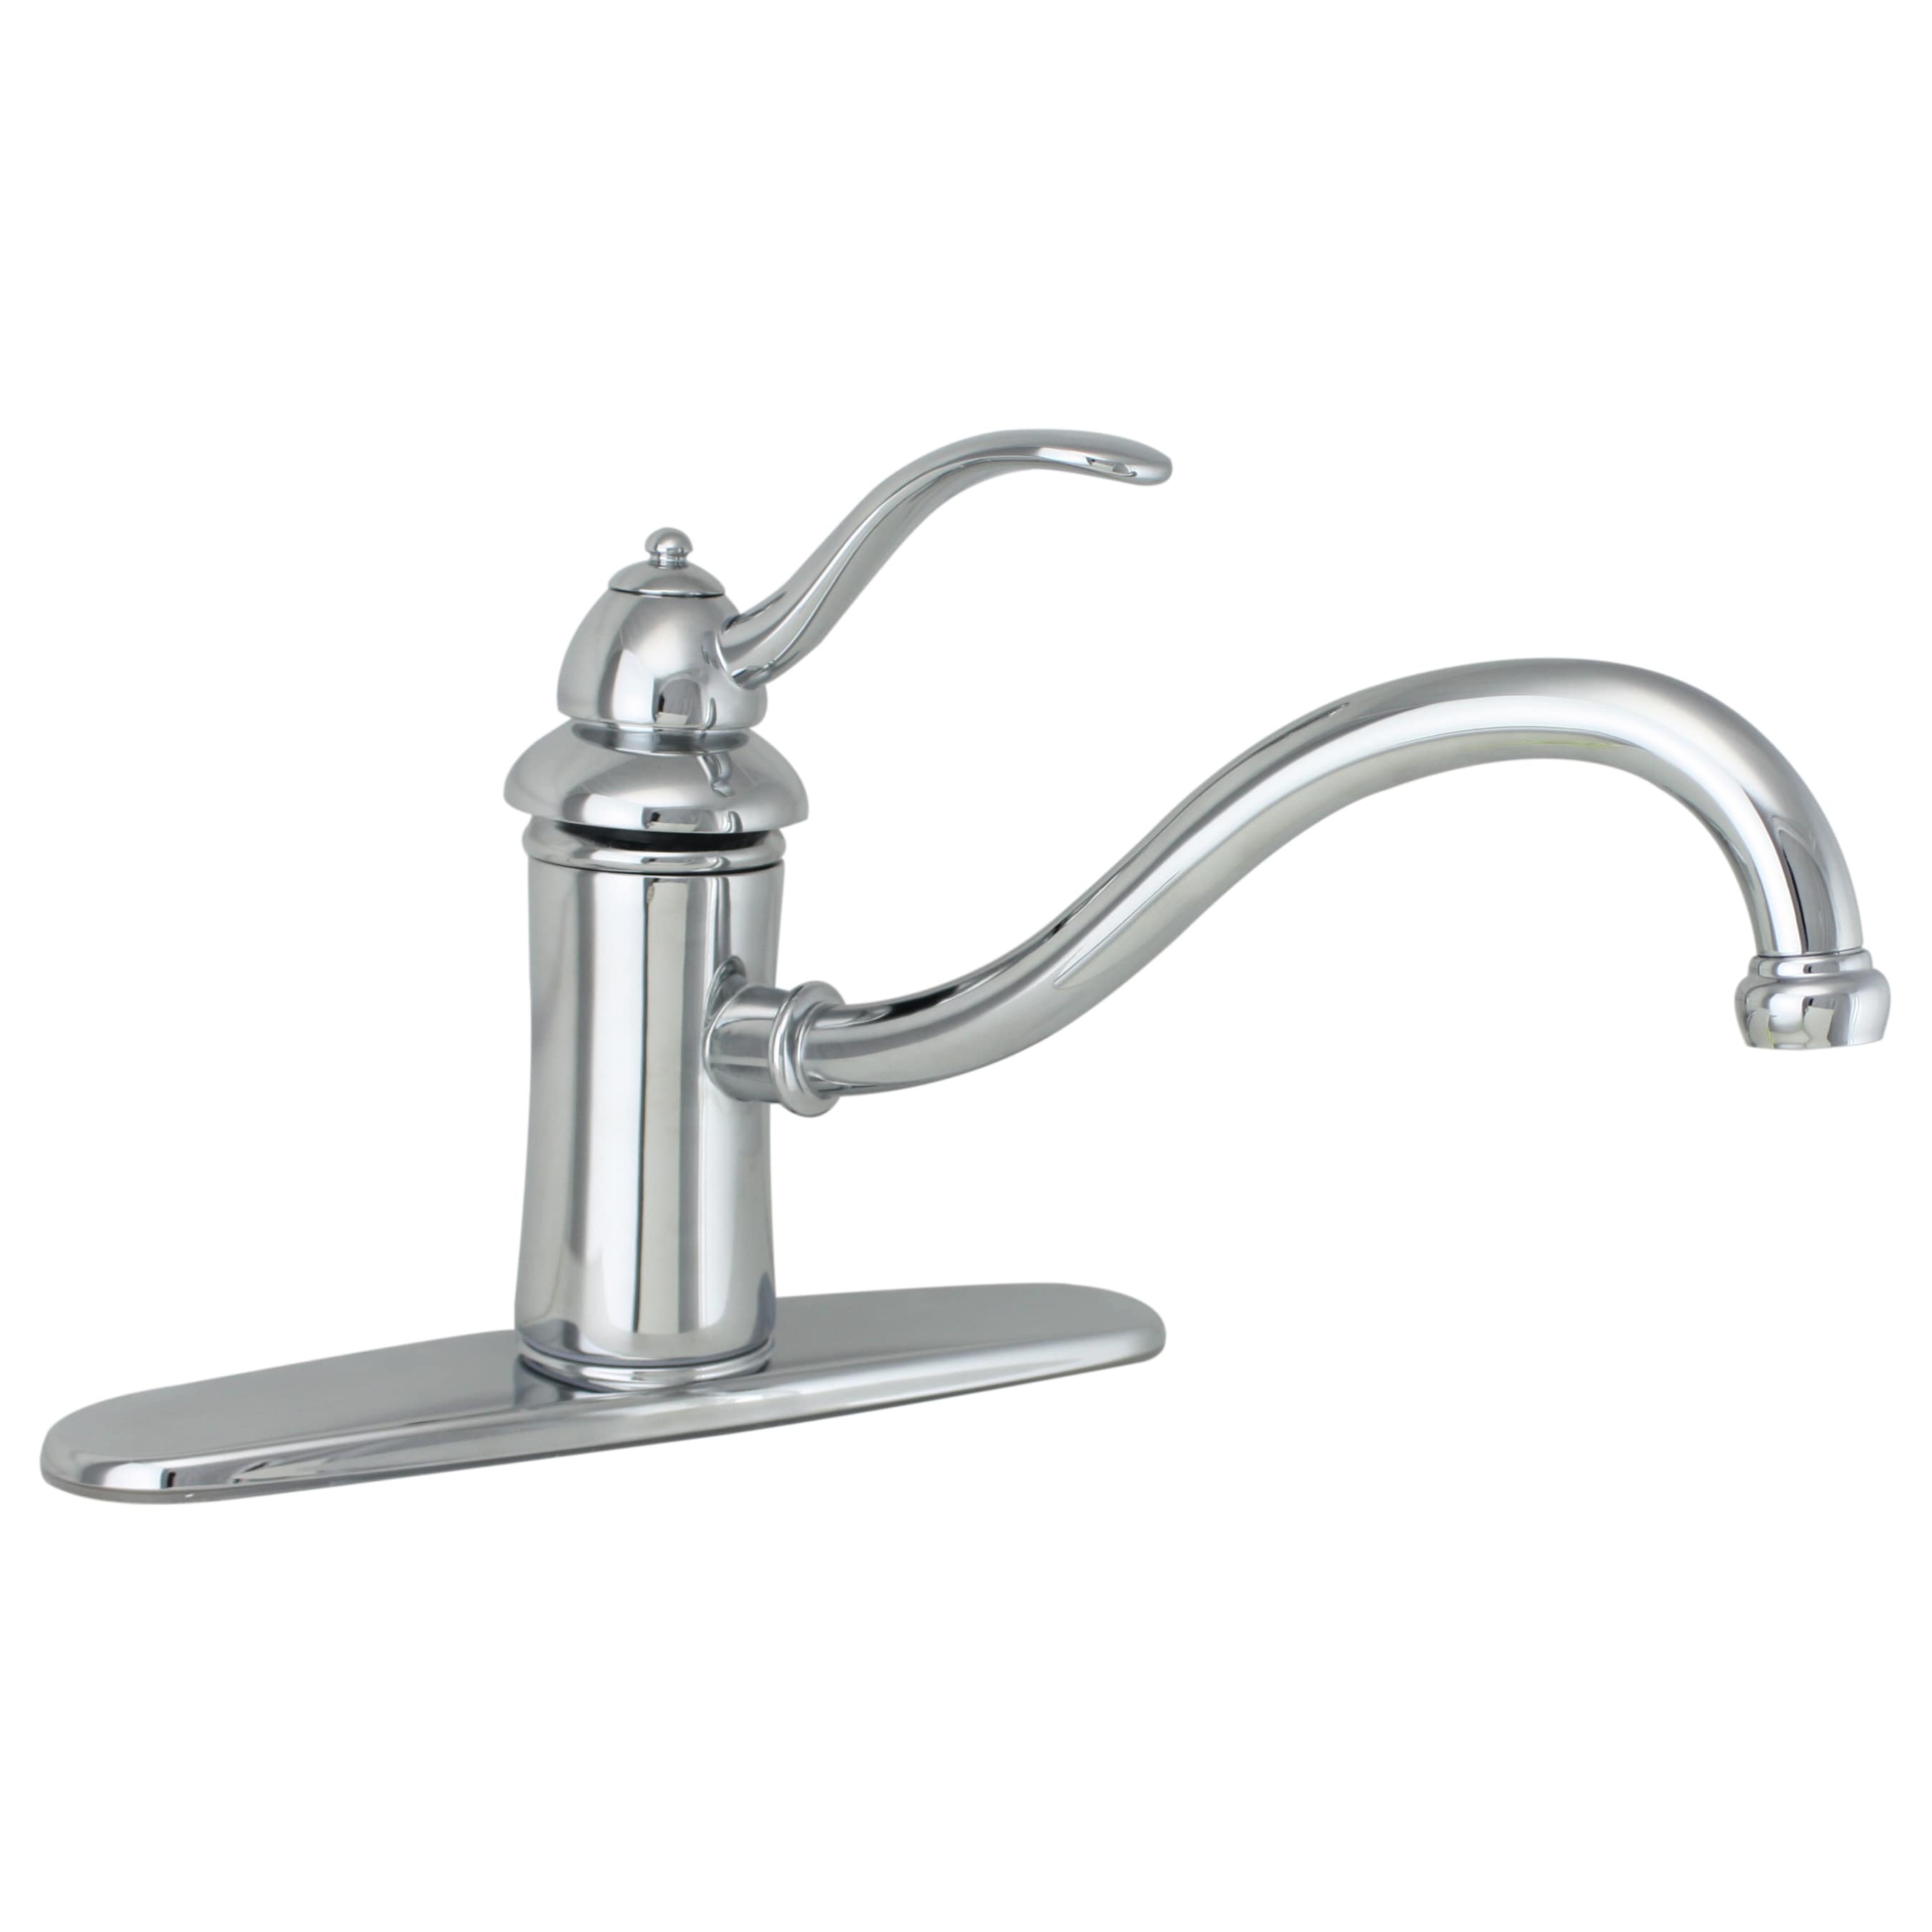 Price Pfister Marielle Single control Polished Chrome Kitchen Faucet